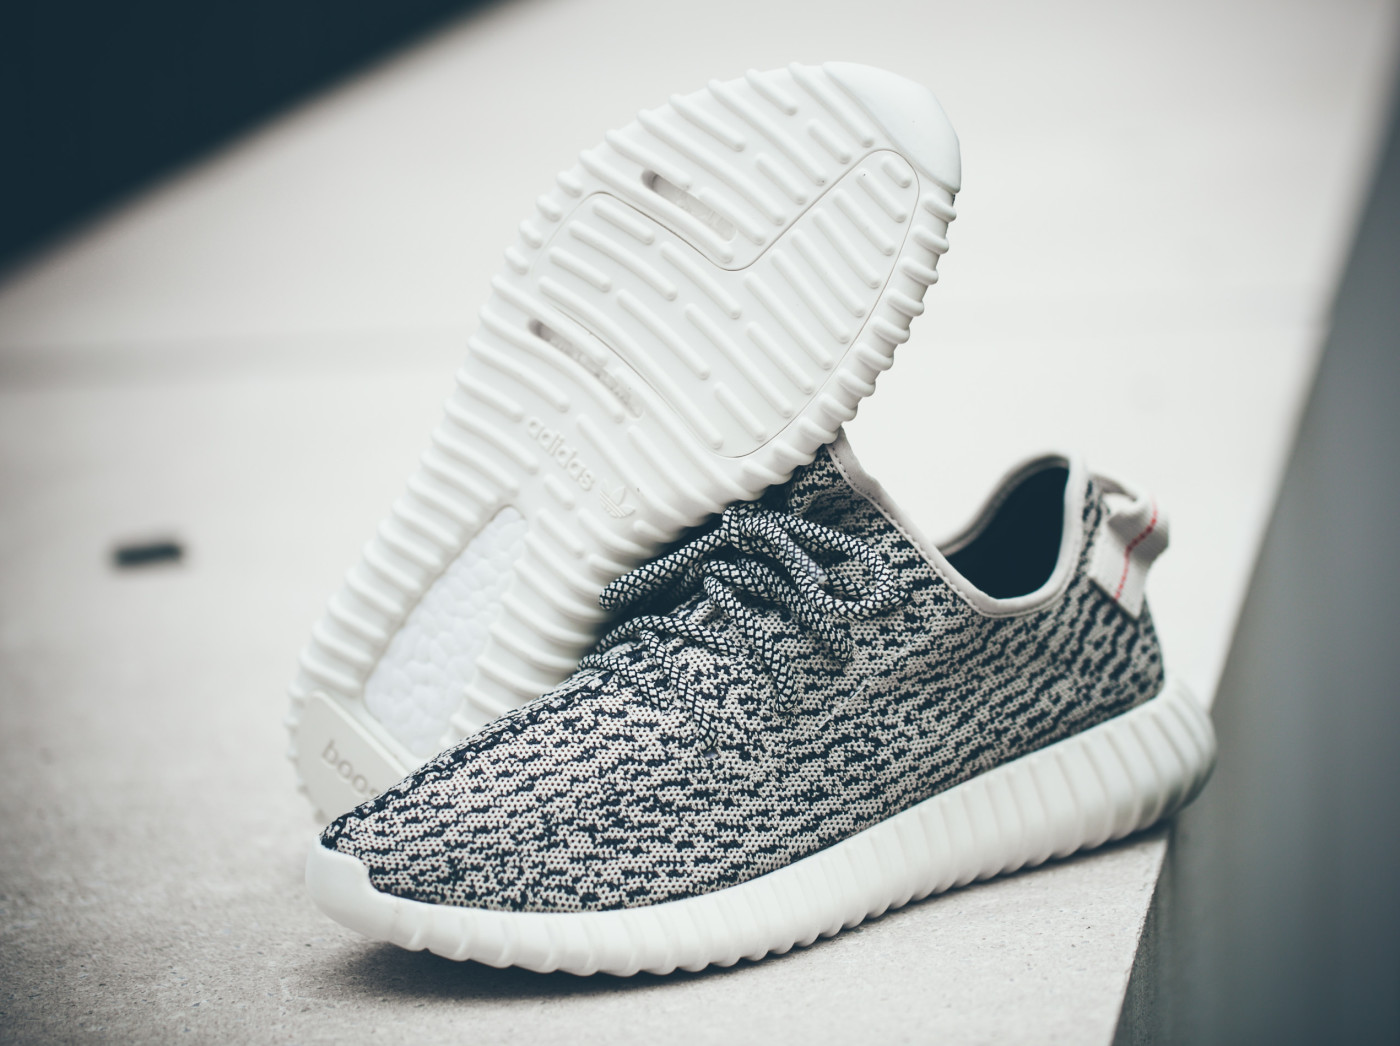 adidas Yeezy Boost 350 Release Guide 